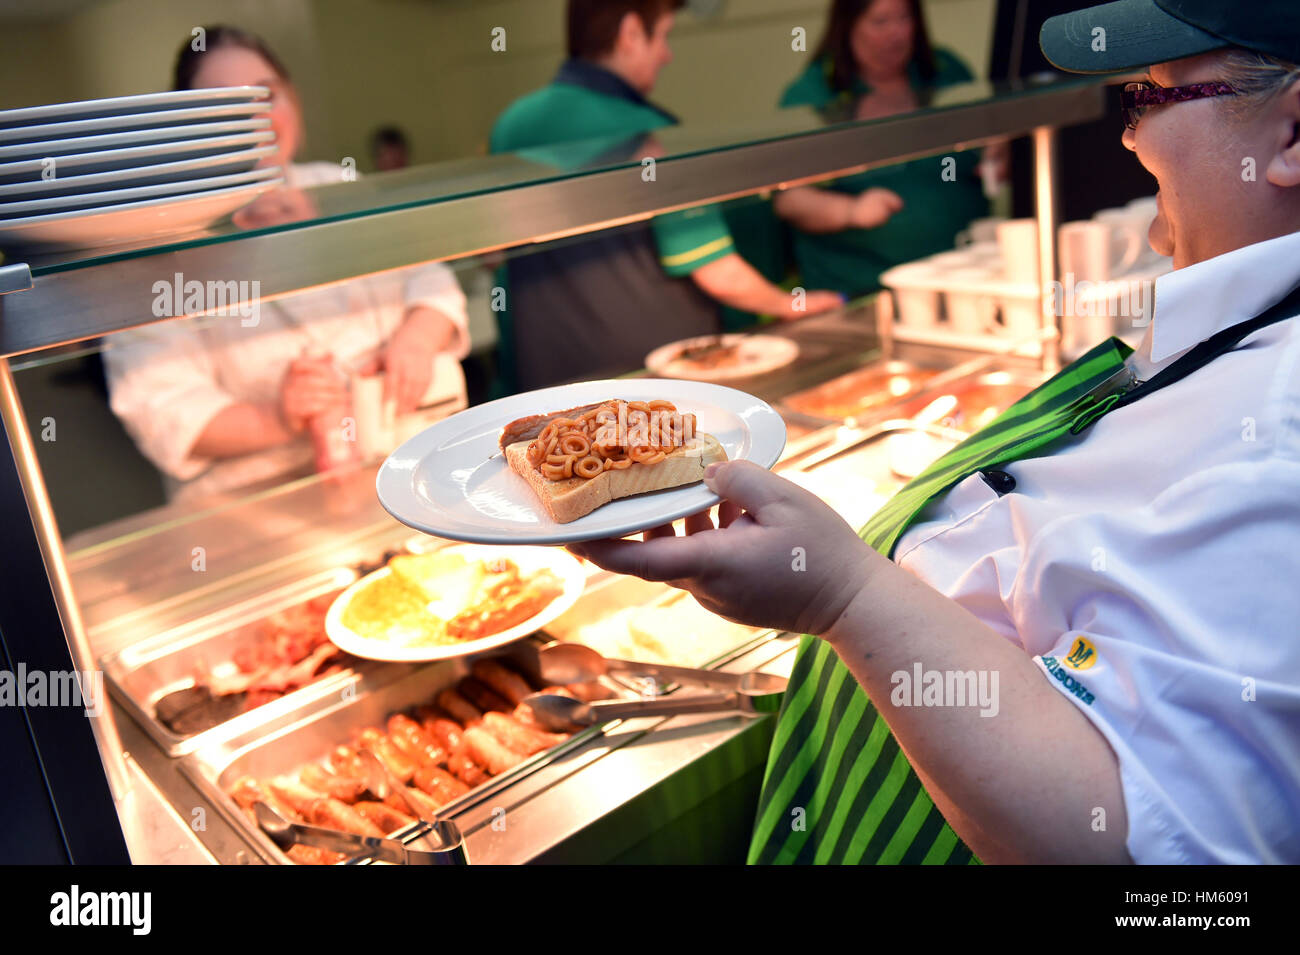 Breakfast is served at a staff Canteen, Stock Photo